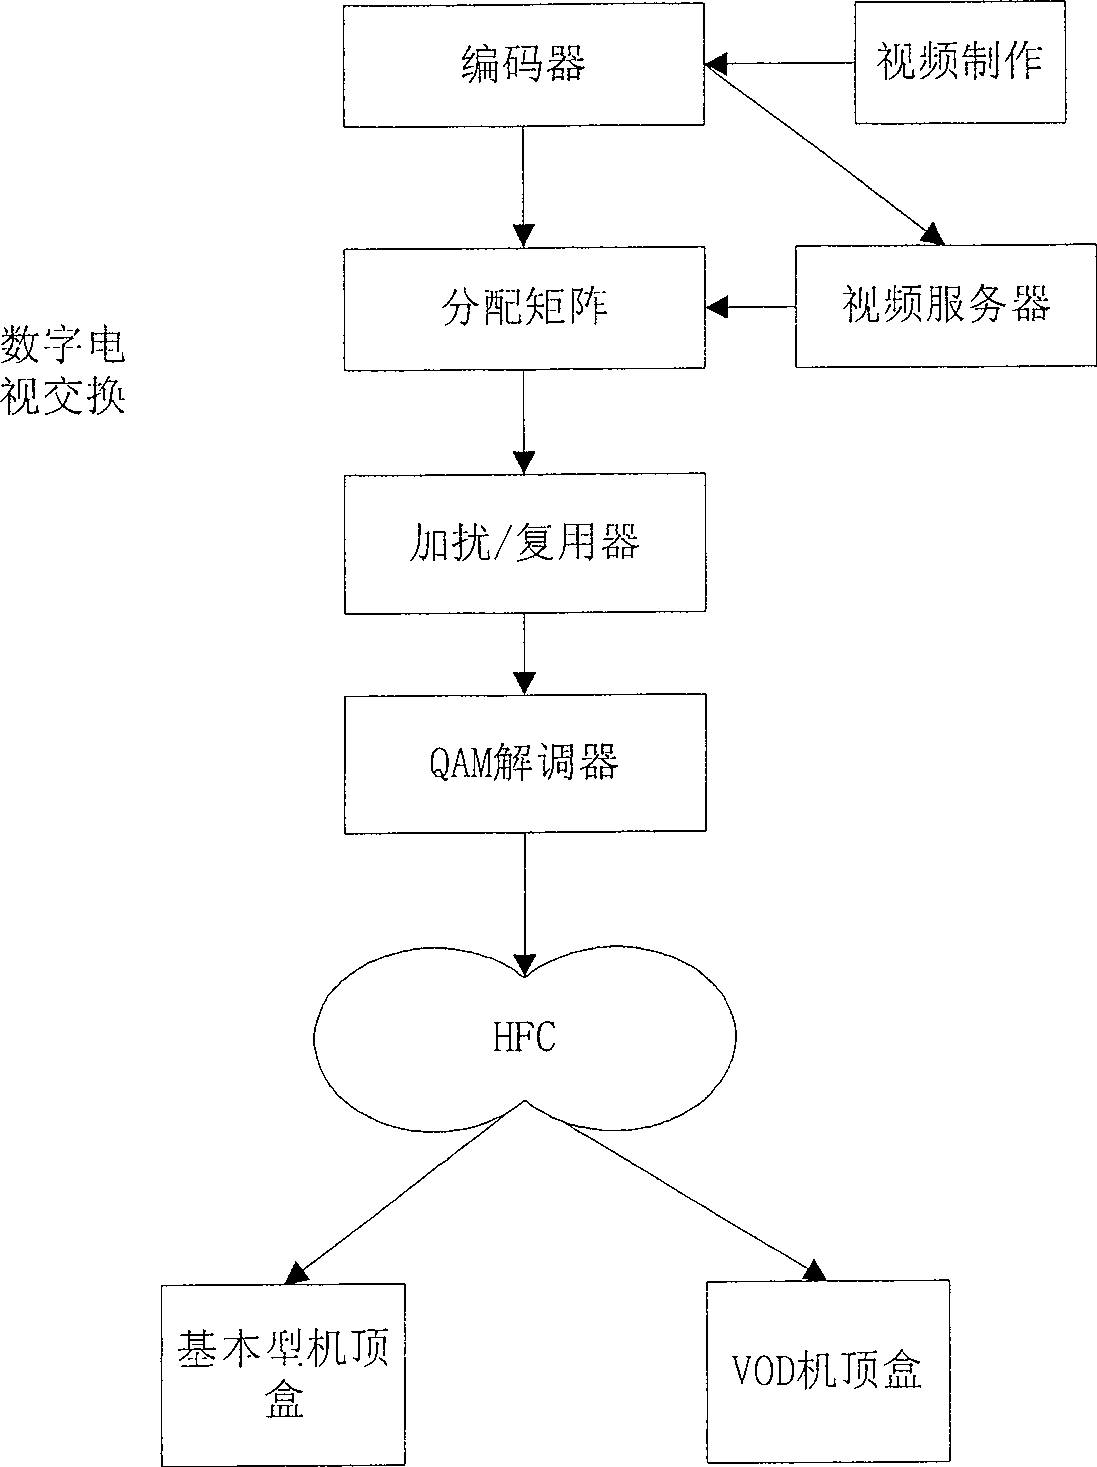 Mobile video broadcasting system and the method thereof